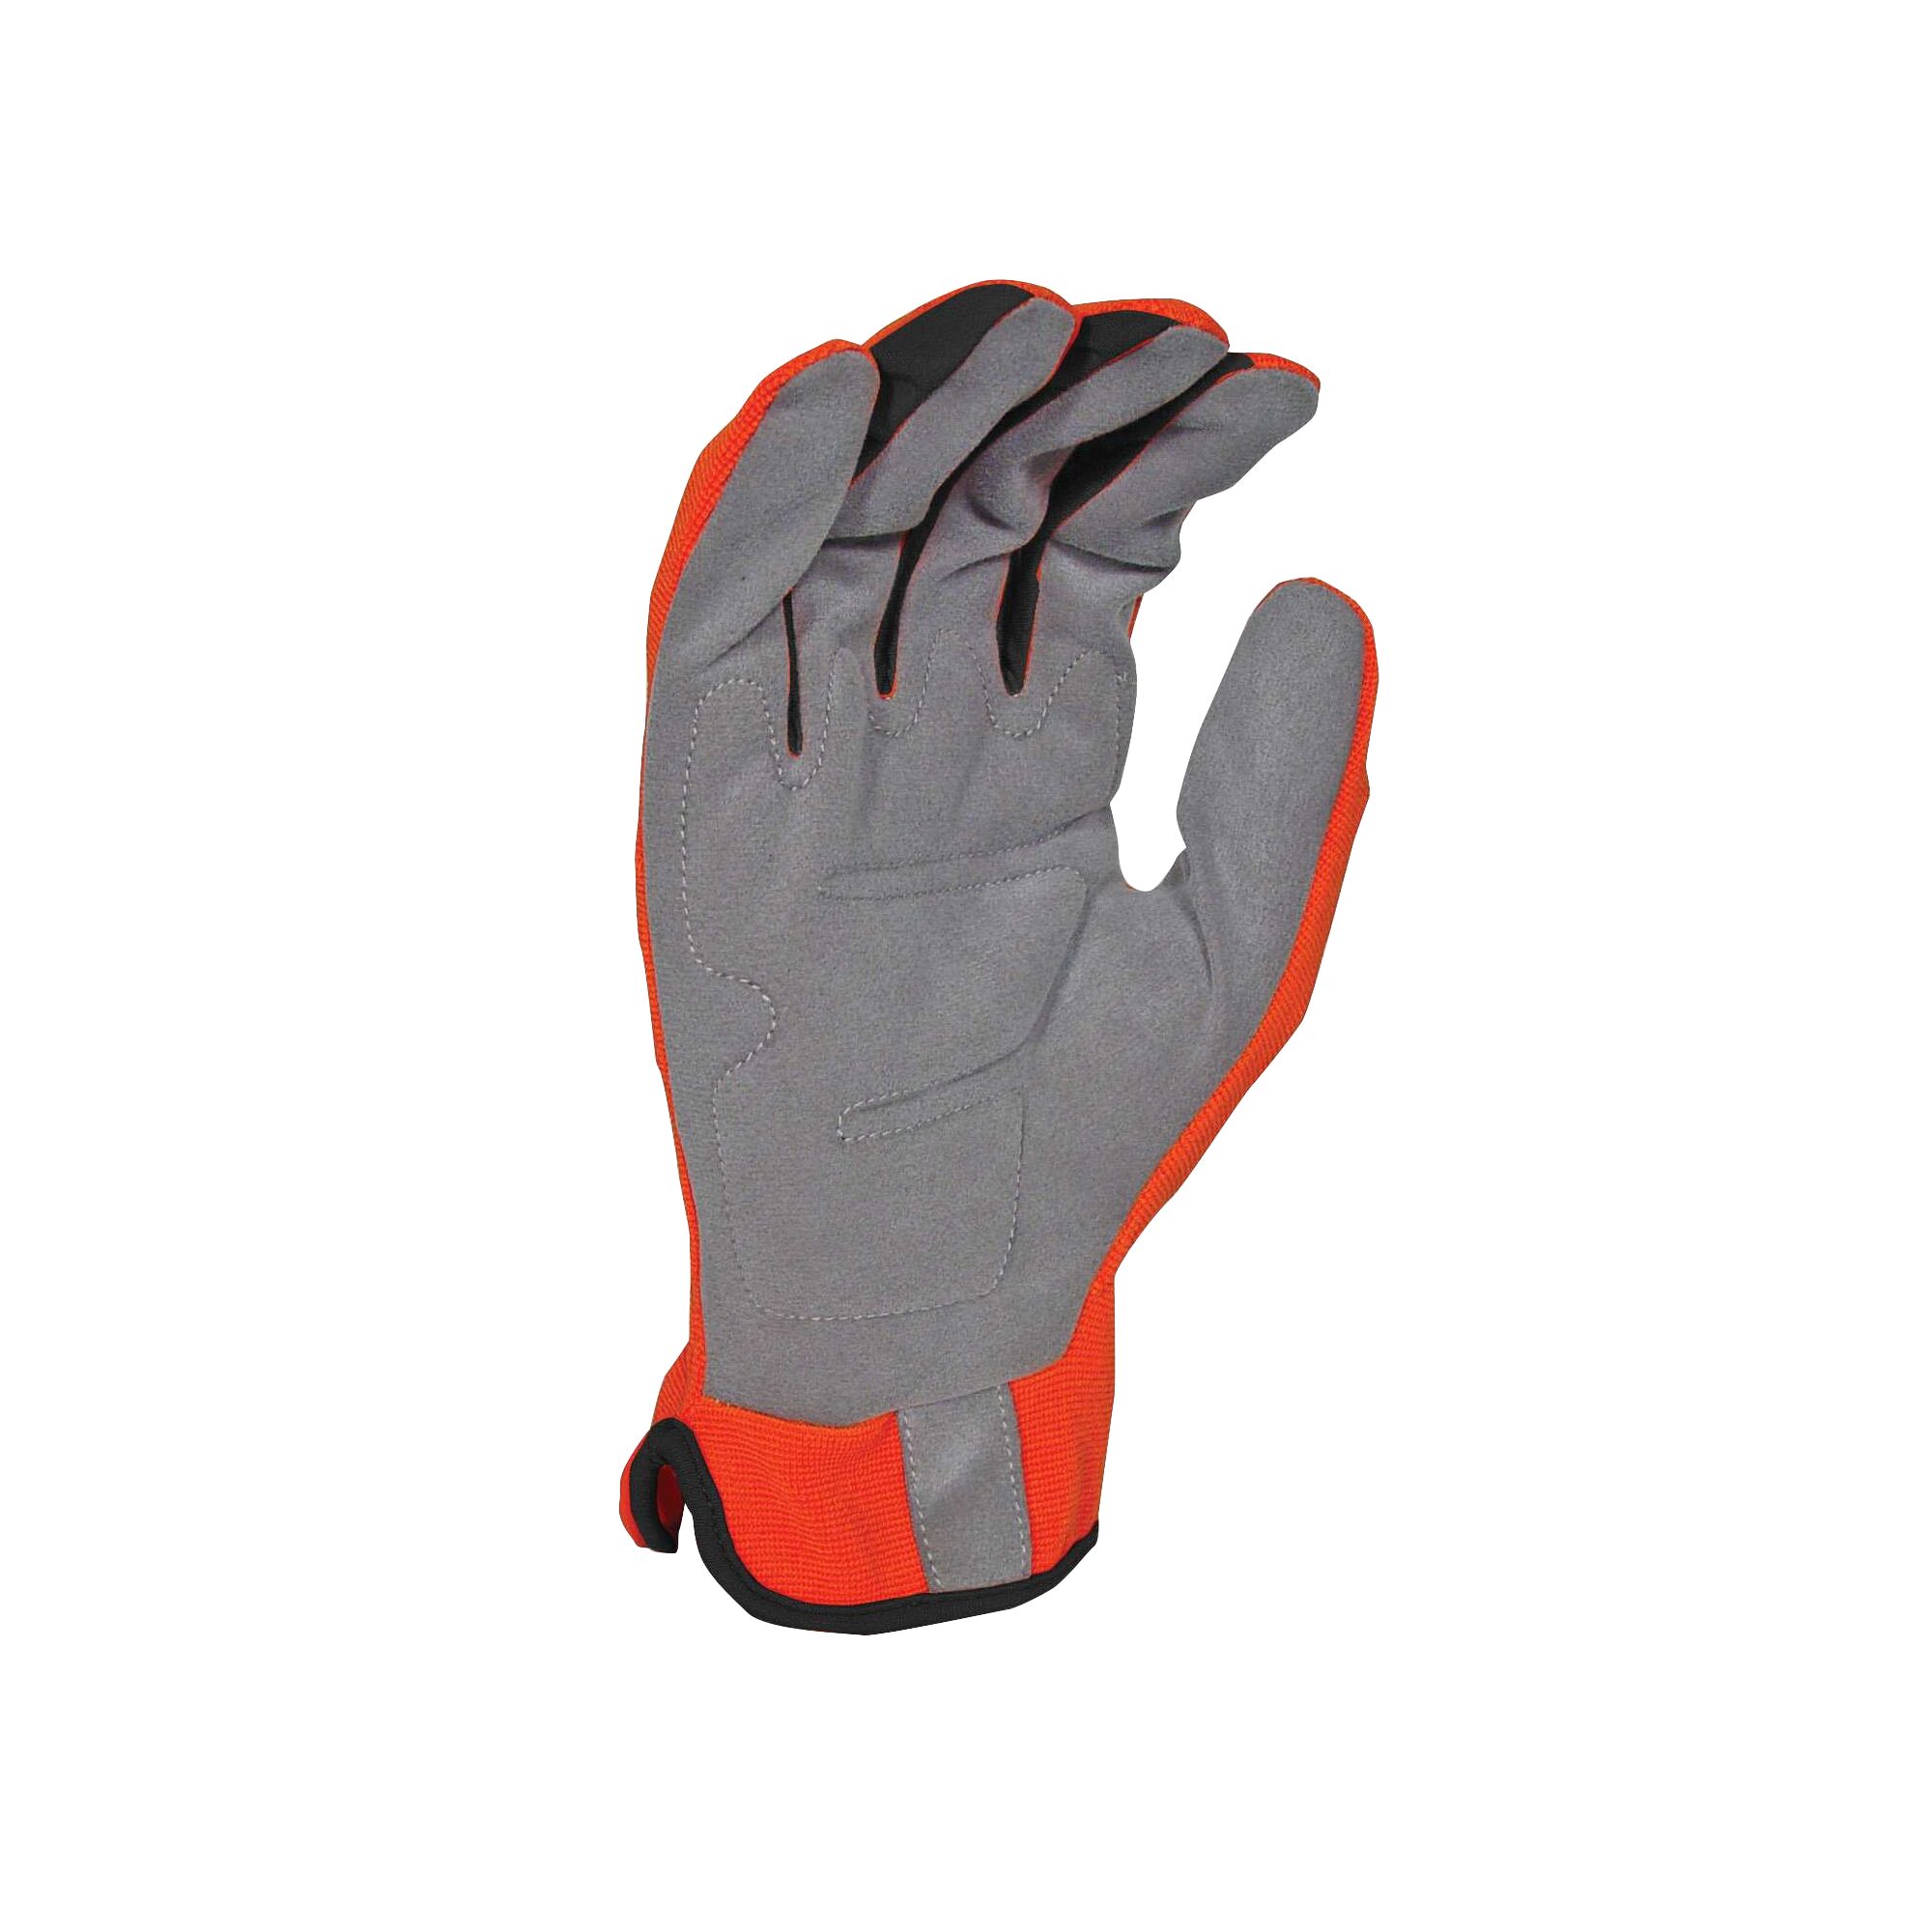 Profile of black and decker easy fit all purpose glove.